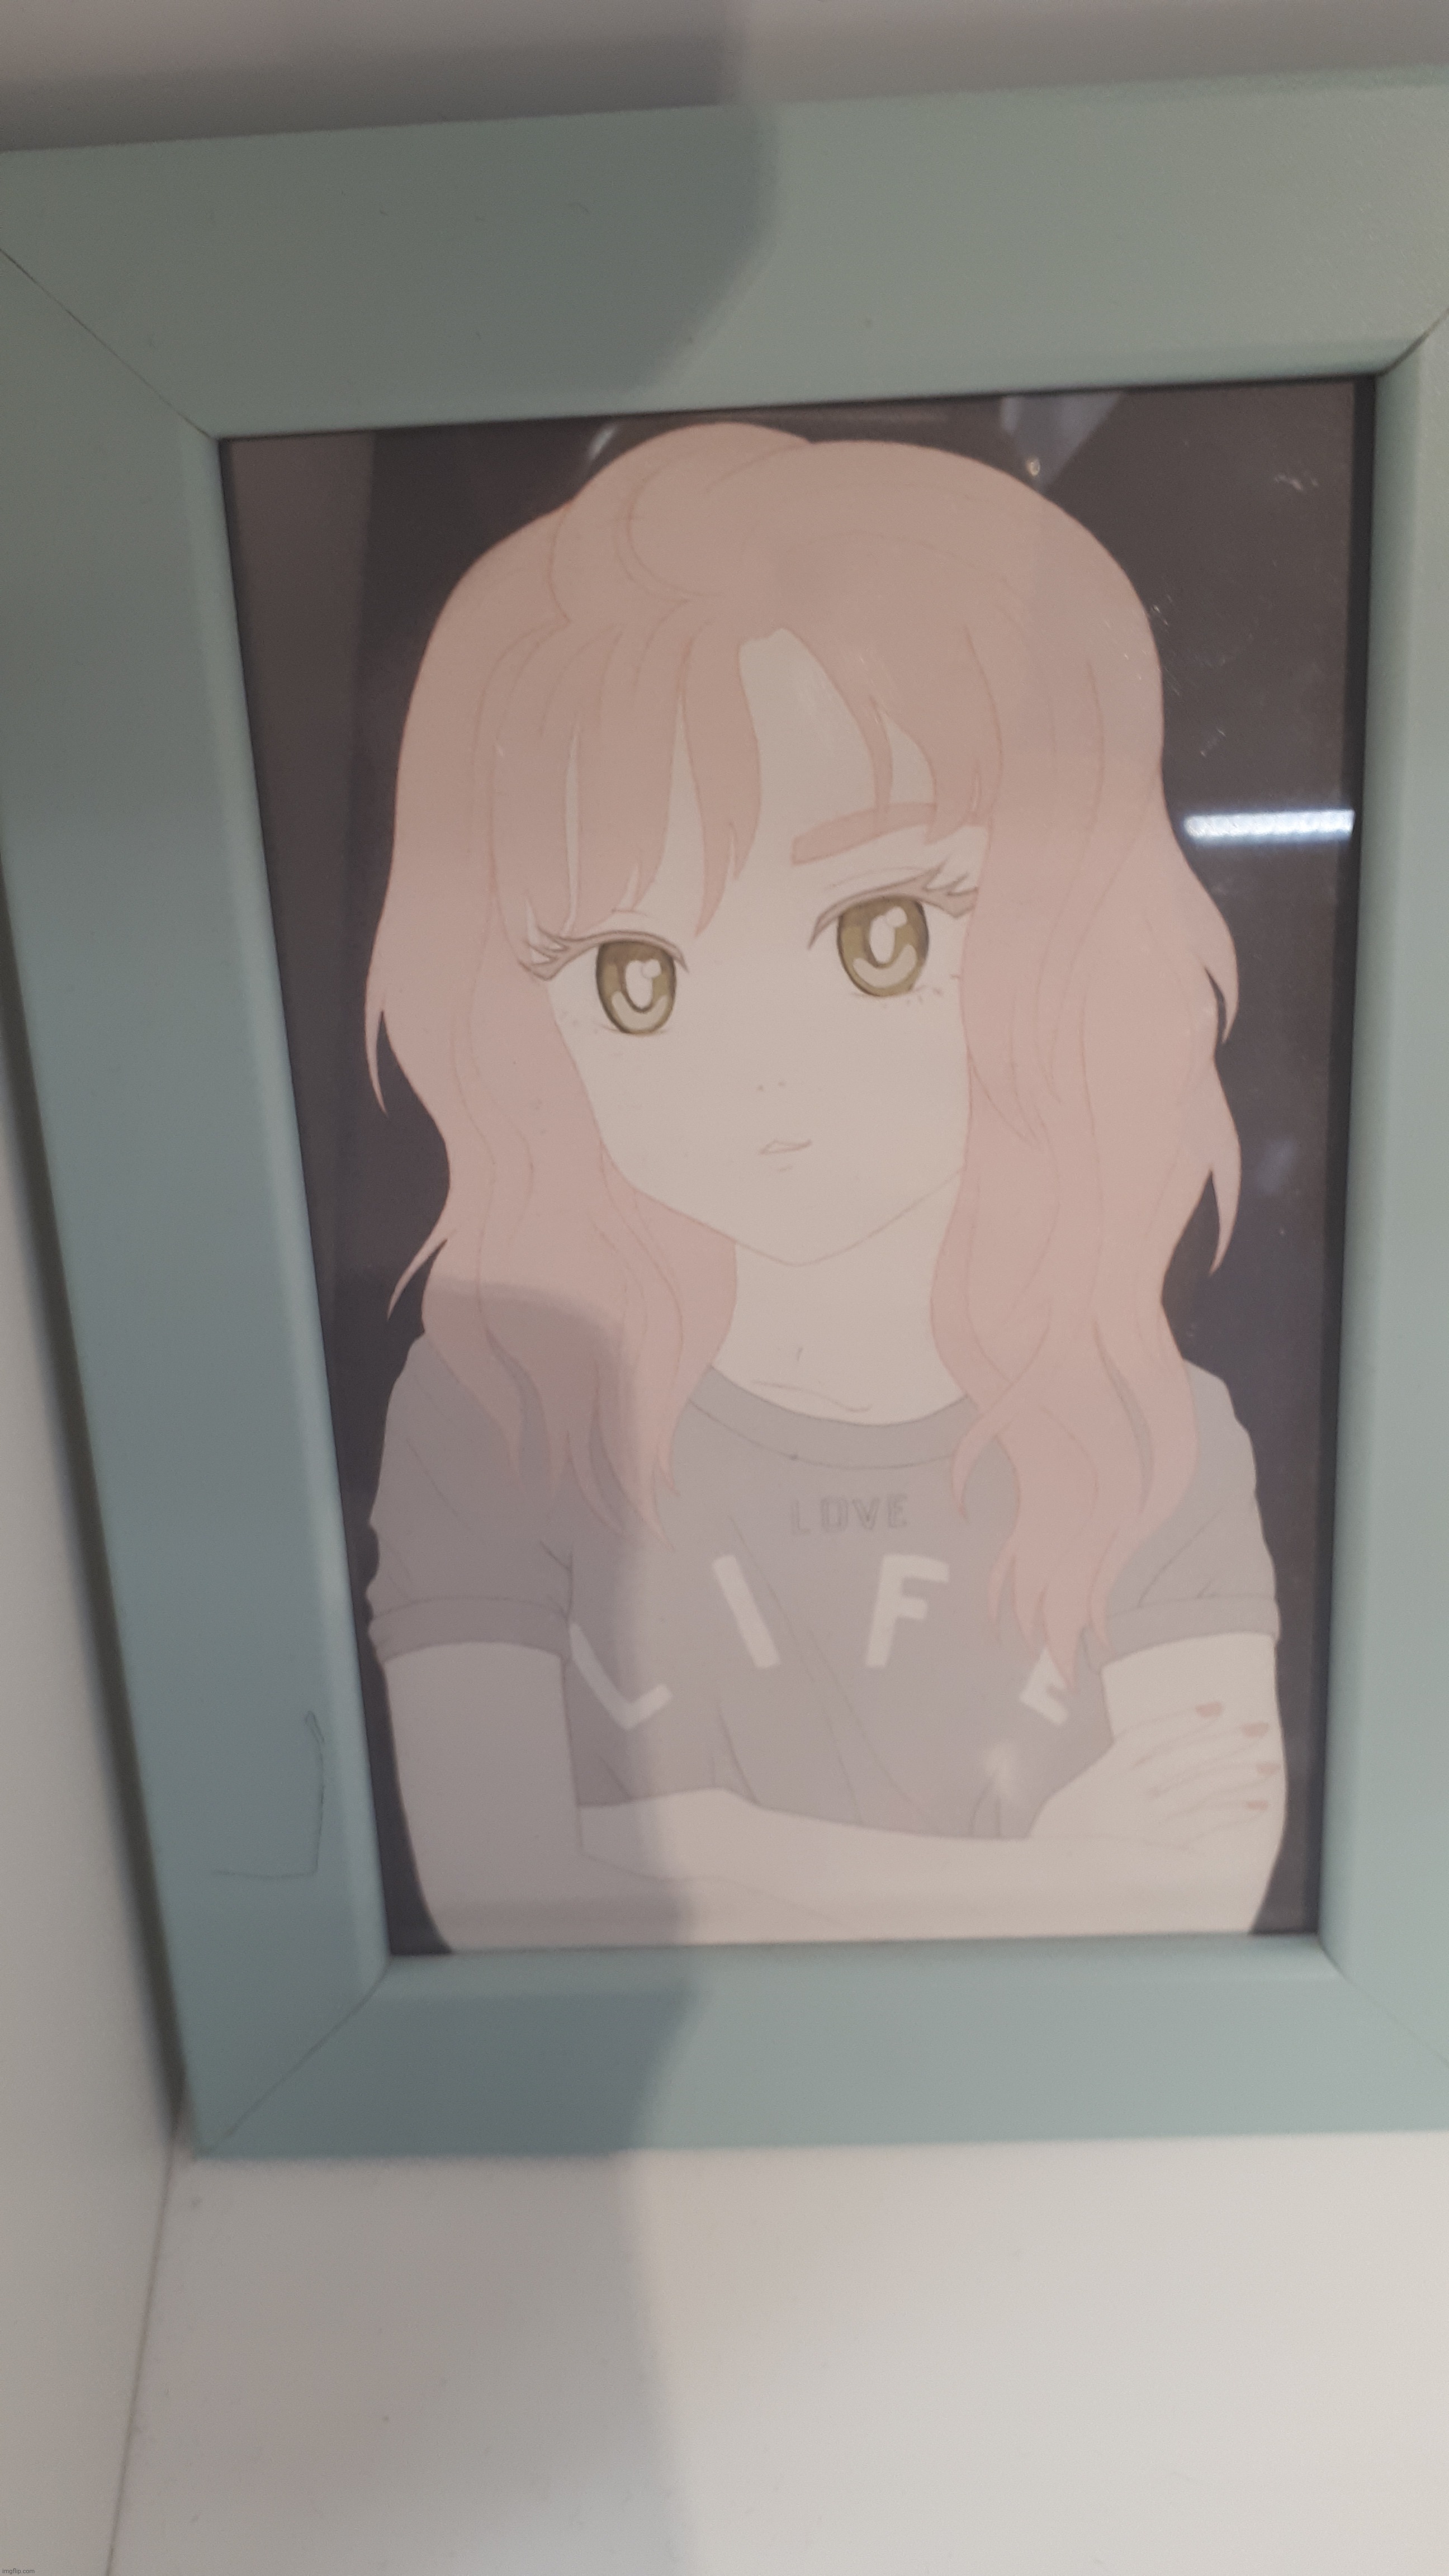 Found this in an IKEA store | image tagged in anime,anime girl,ikea,ikea store,wow,surprise | made w/ Imgflip meme maker